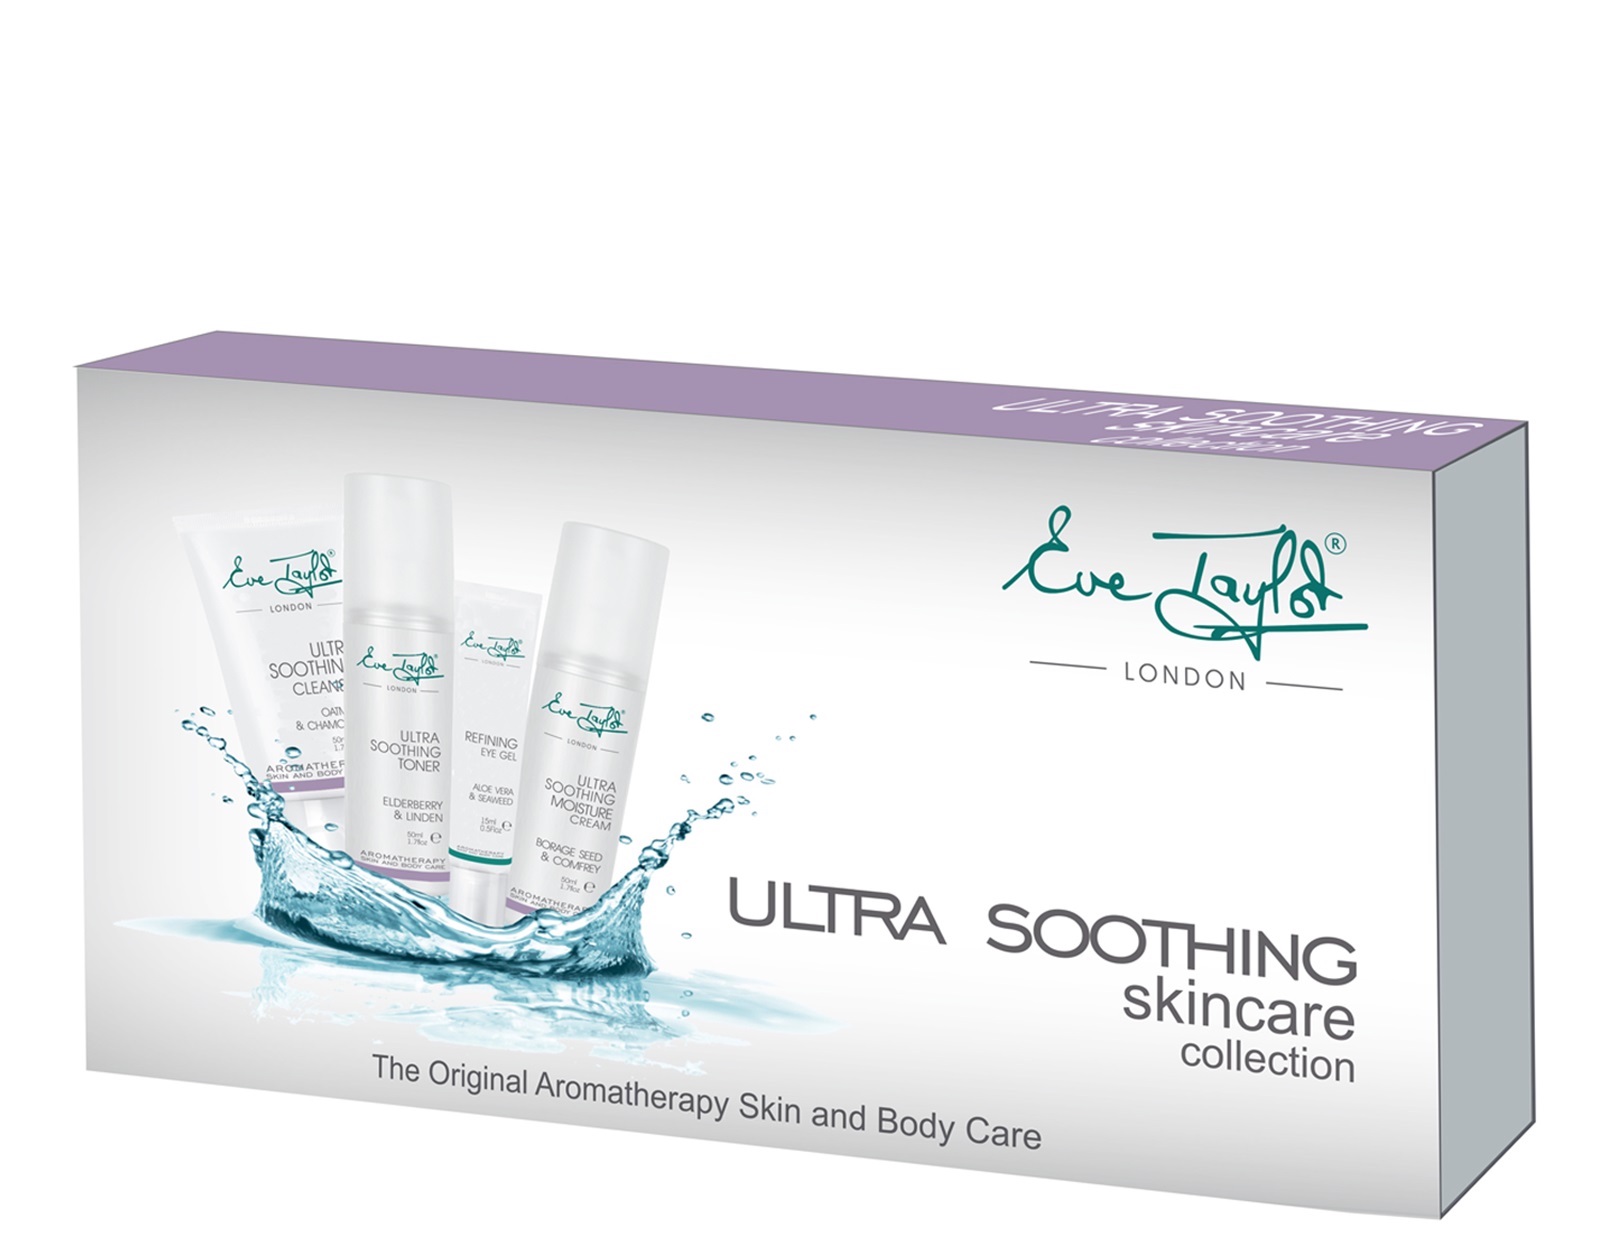 Ultra Soothing Skincare Collection